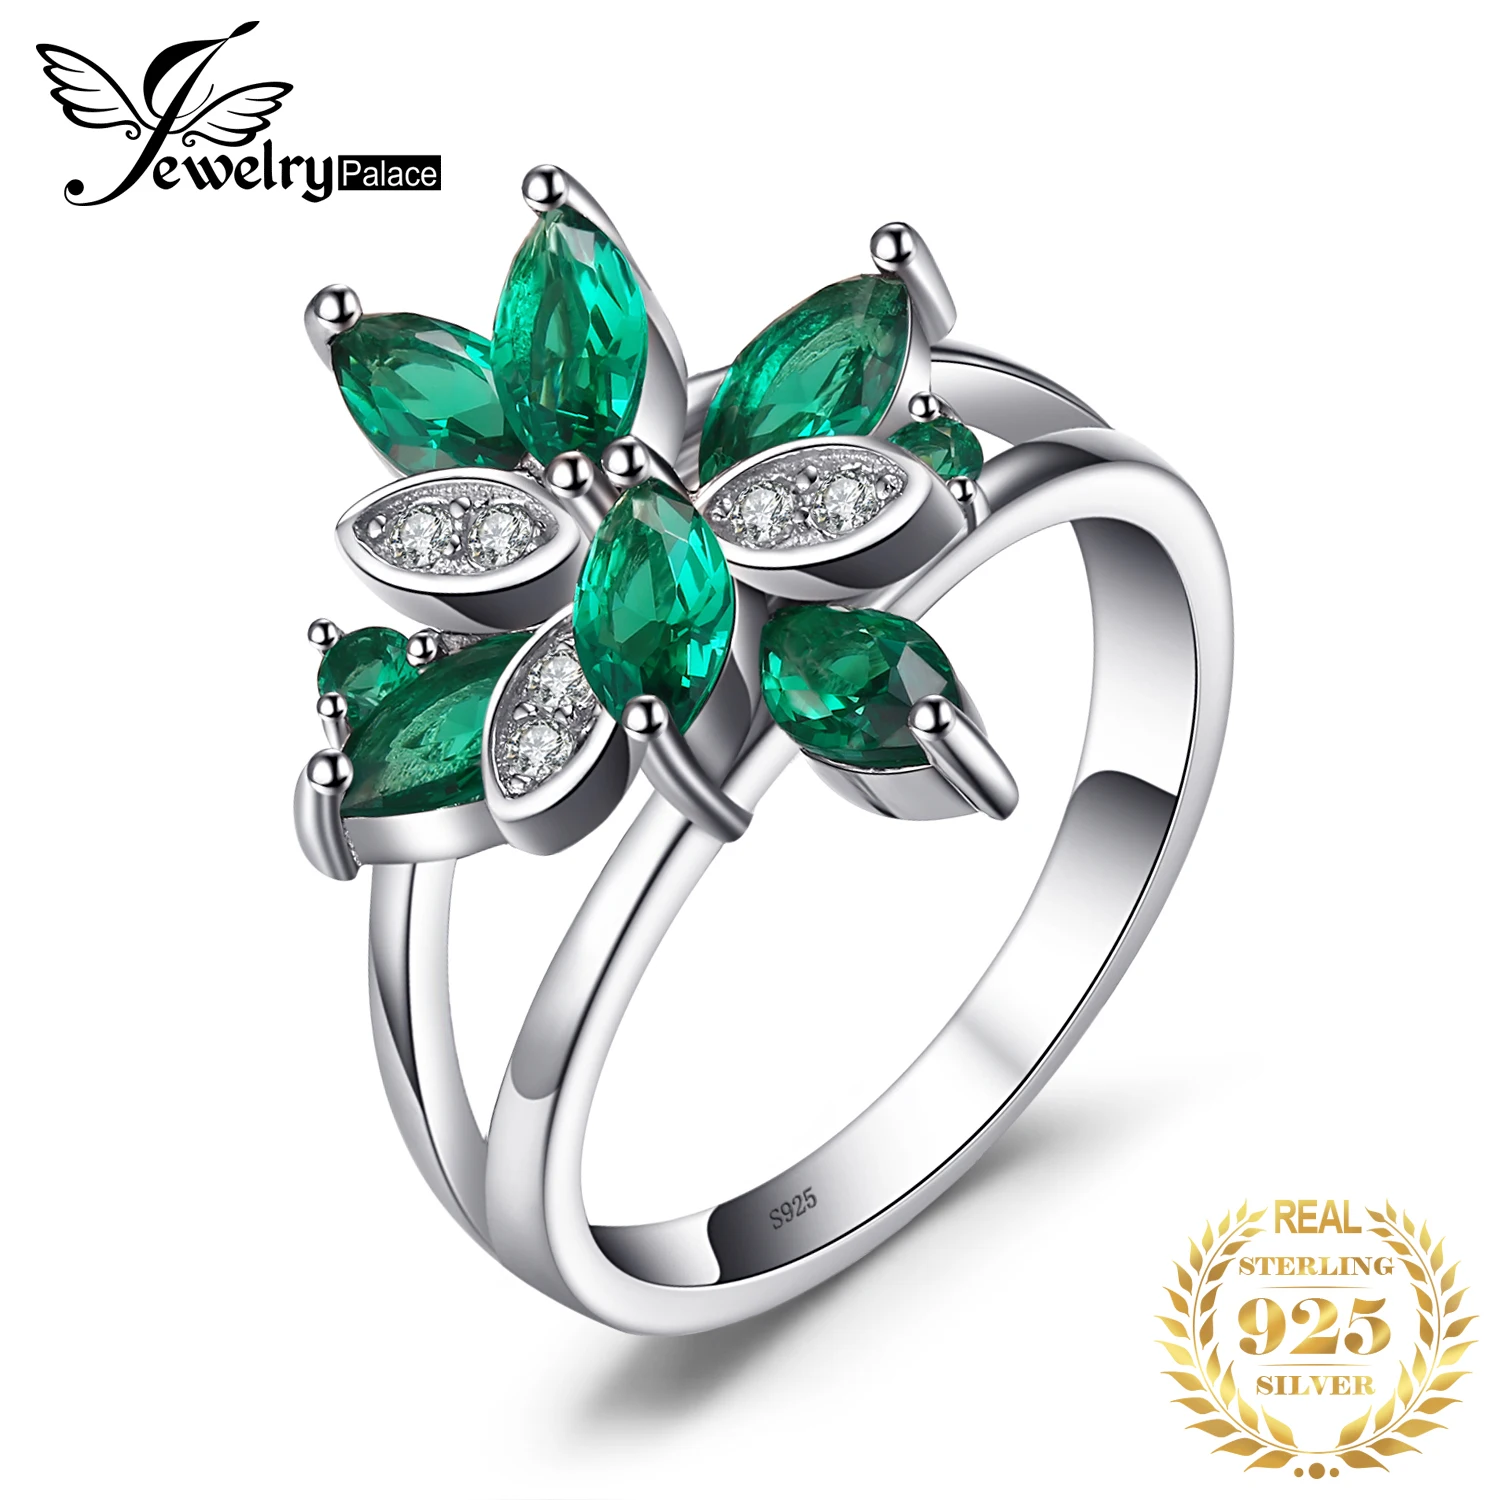 

JewelryPalace Flower 1.2ct Green Simulated Nano Emerald 925 Sterling Silver Cocktail Ring for Women Statement Gemstone Jewerly